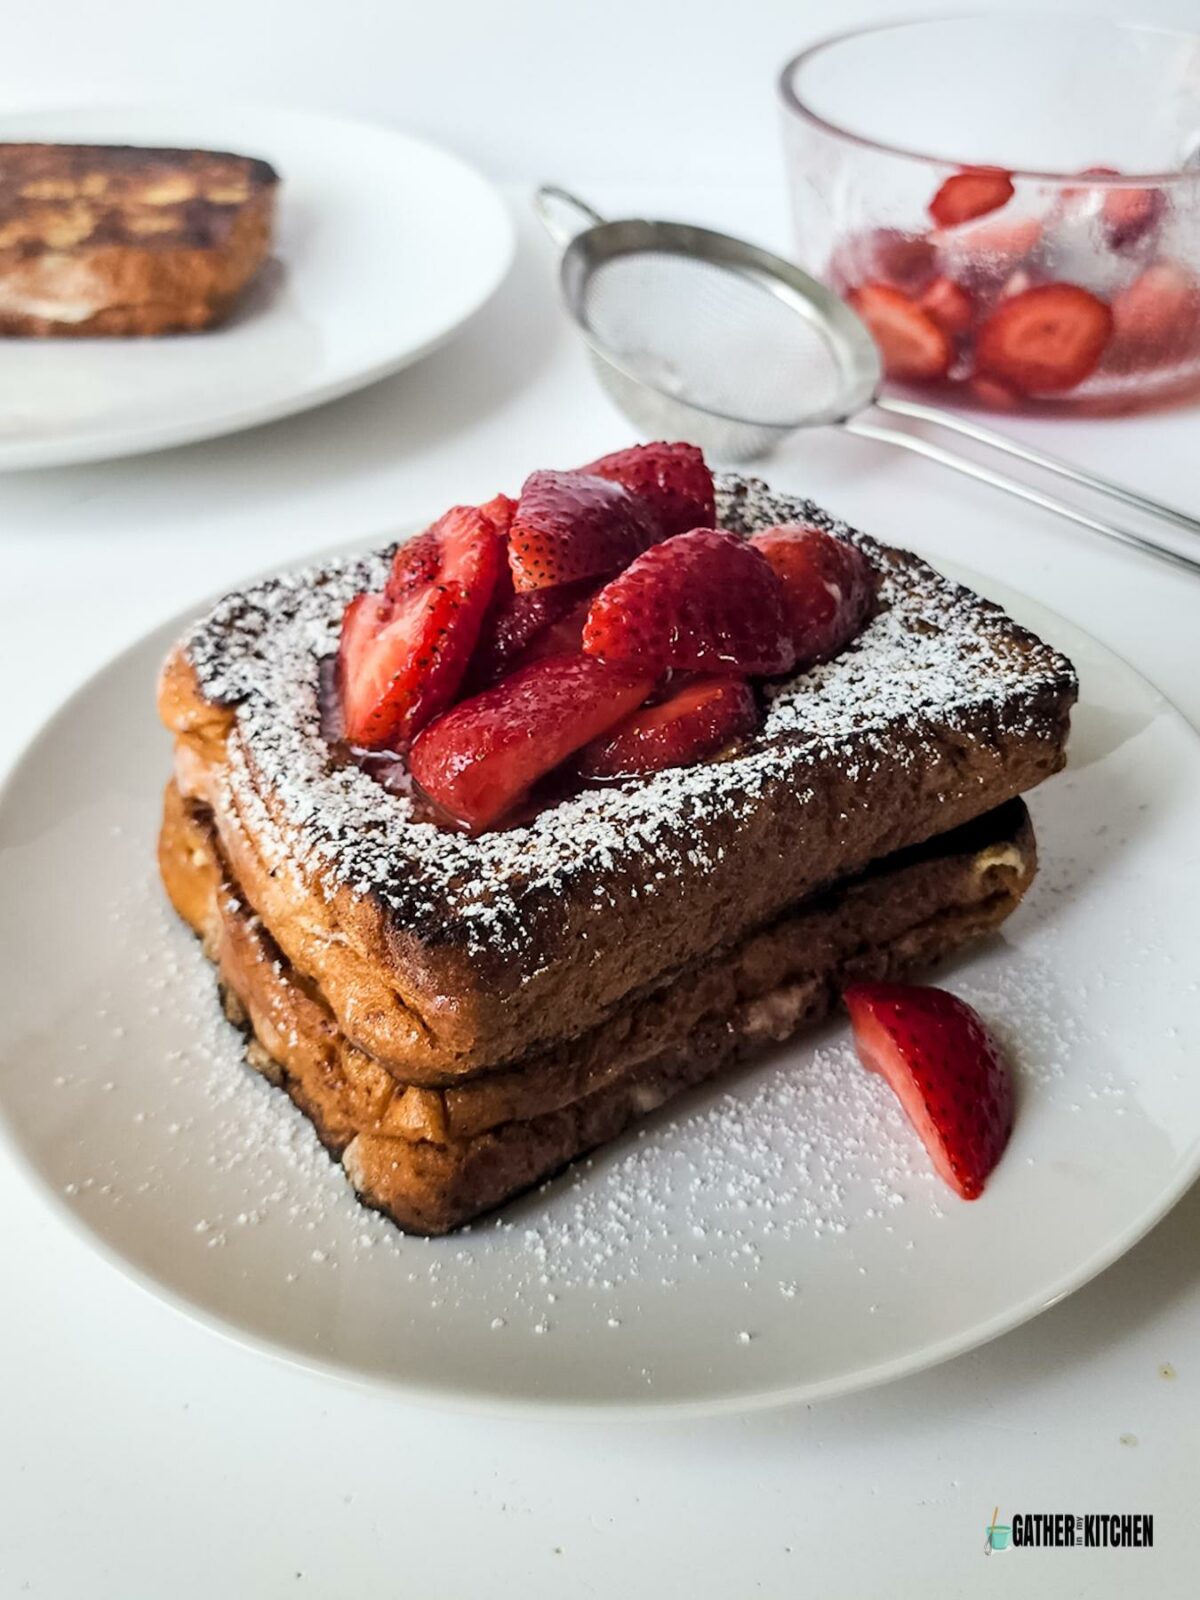 French toast with powdered sugar and strawberries on top.